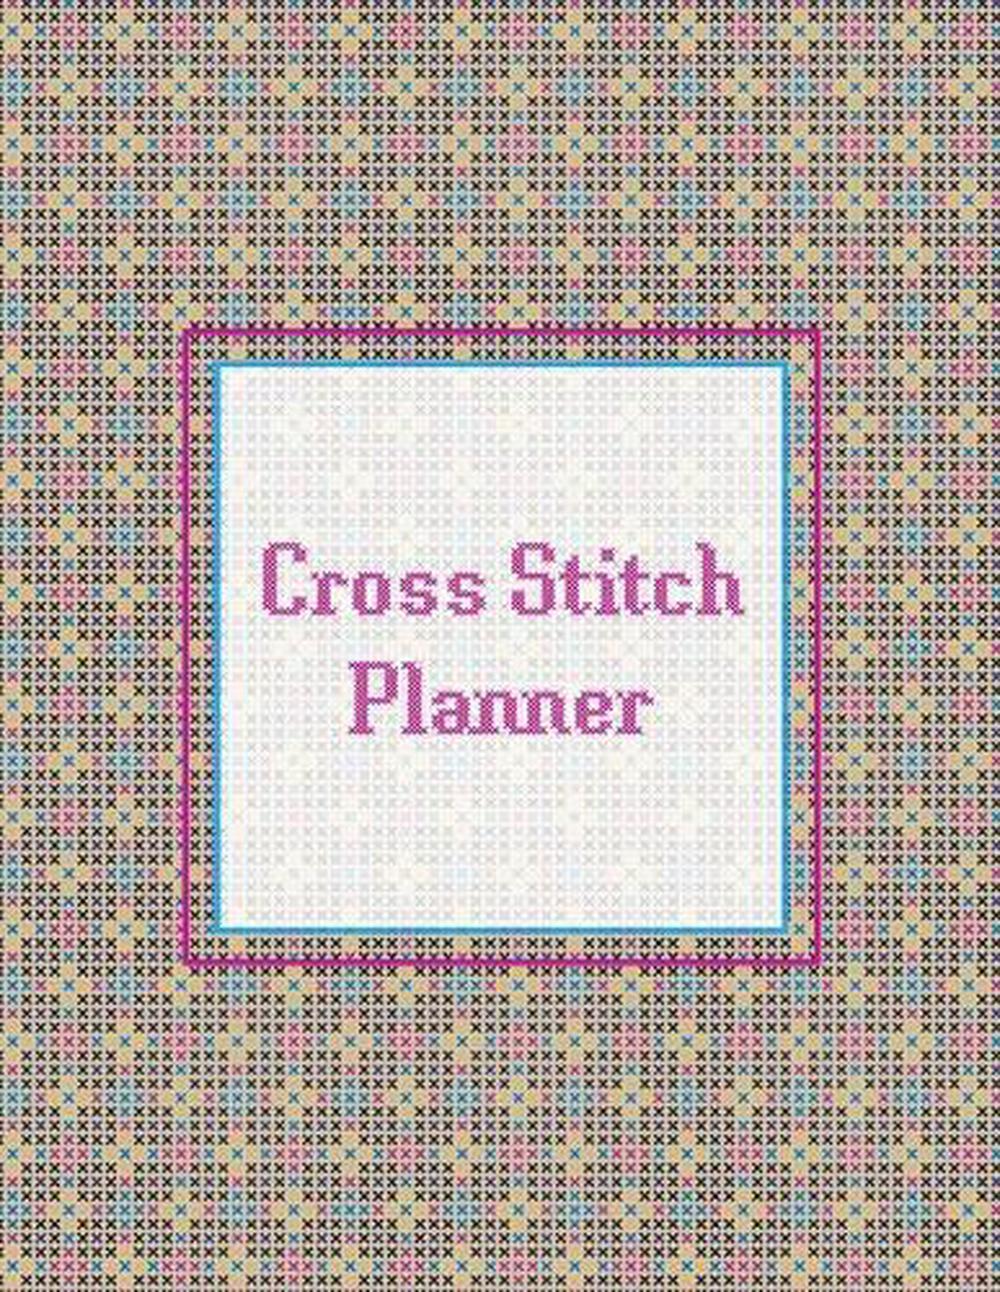 10-x-10-graph-paper-printable-10-count-cross-stitch-grid-free-make